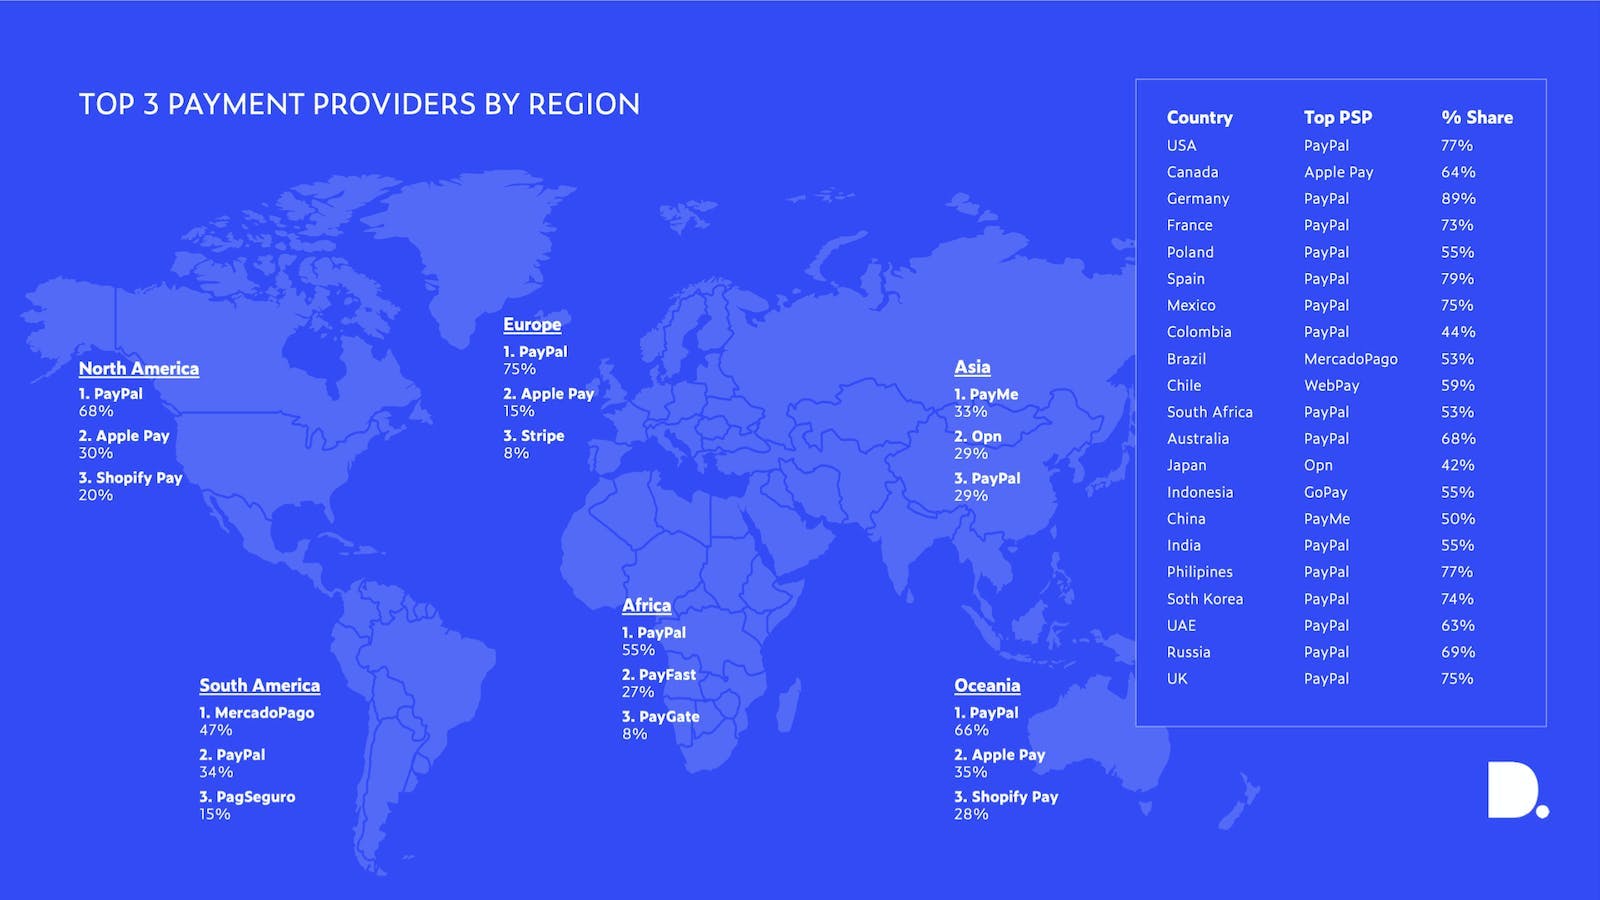 Top payment providers per region and select countries based on share of websites with at least one PSP